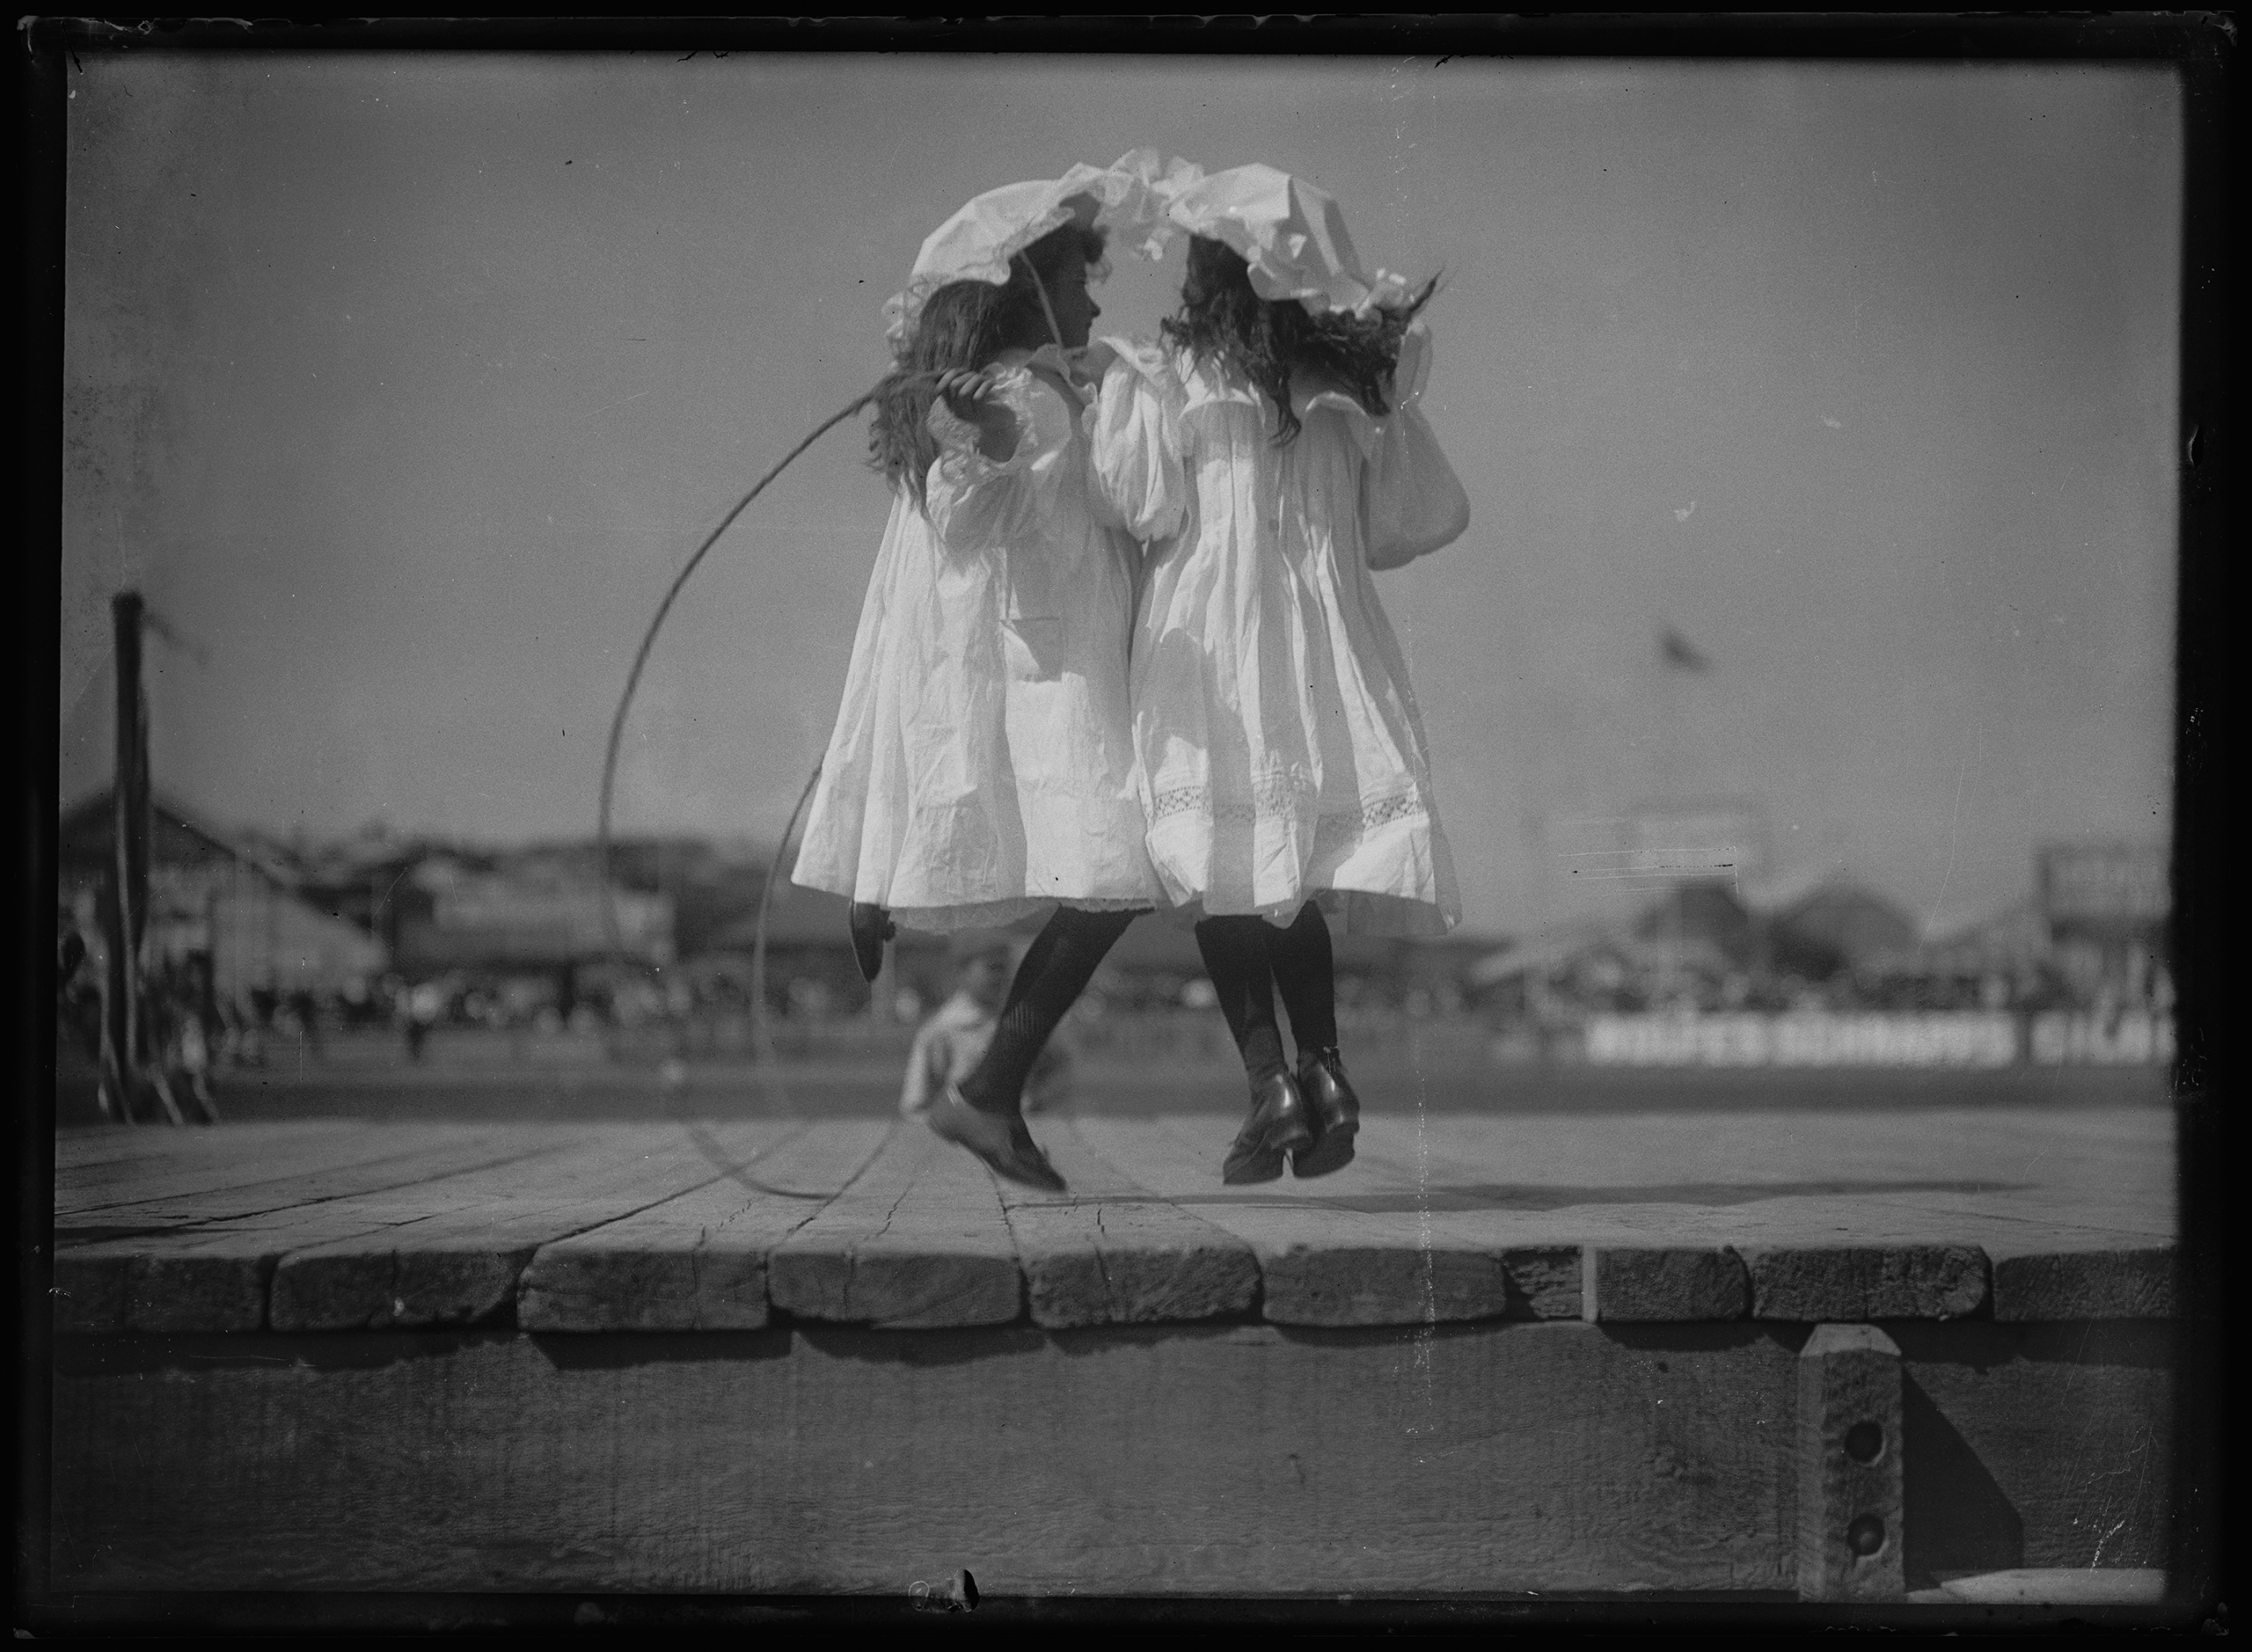 Photograph of girls skipping